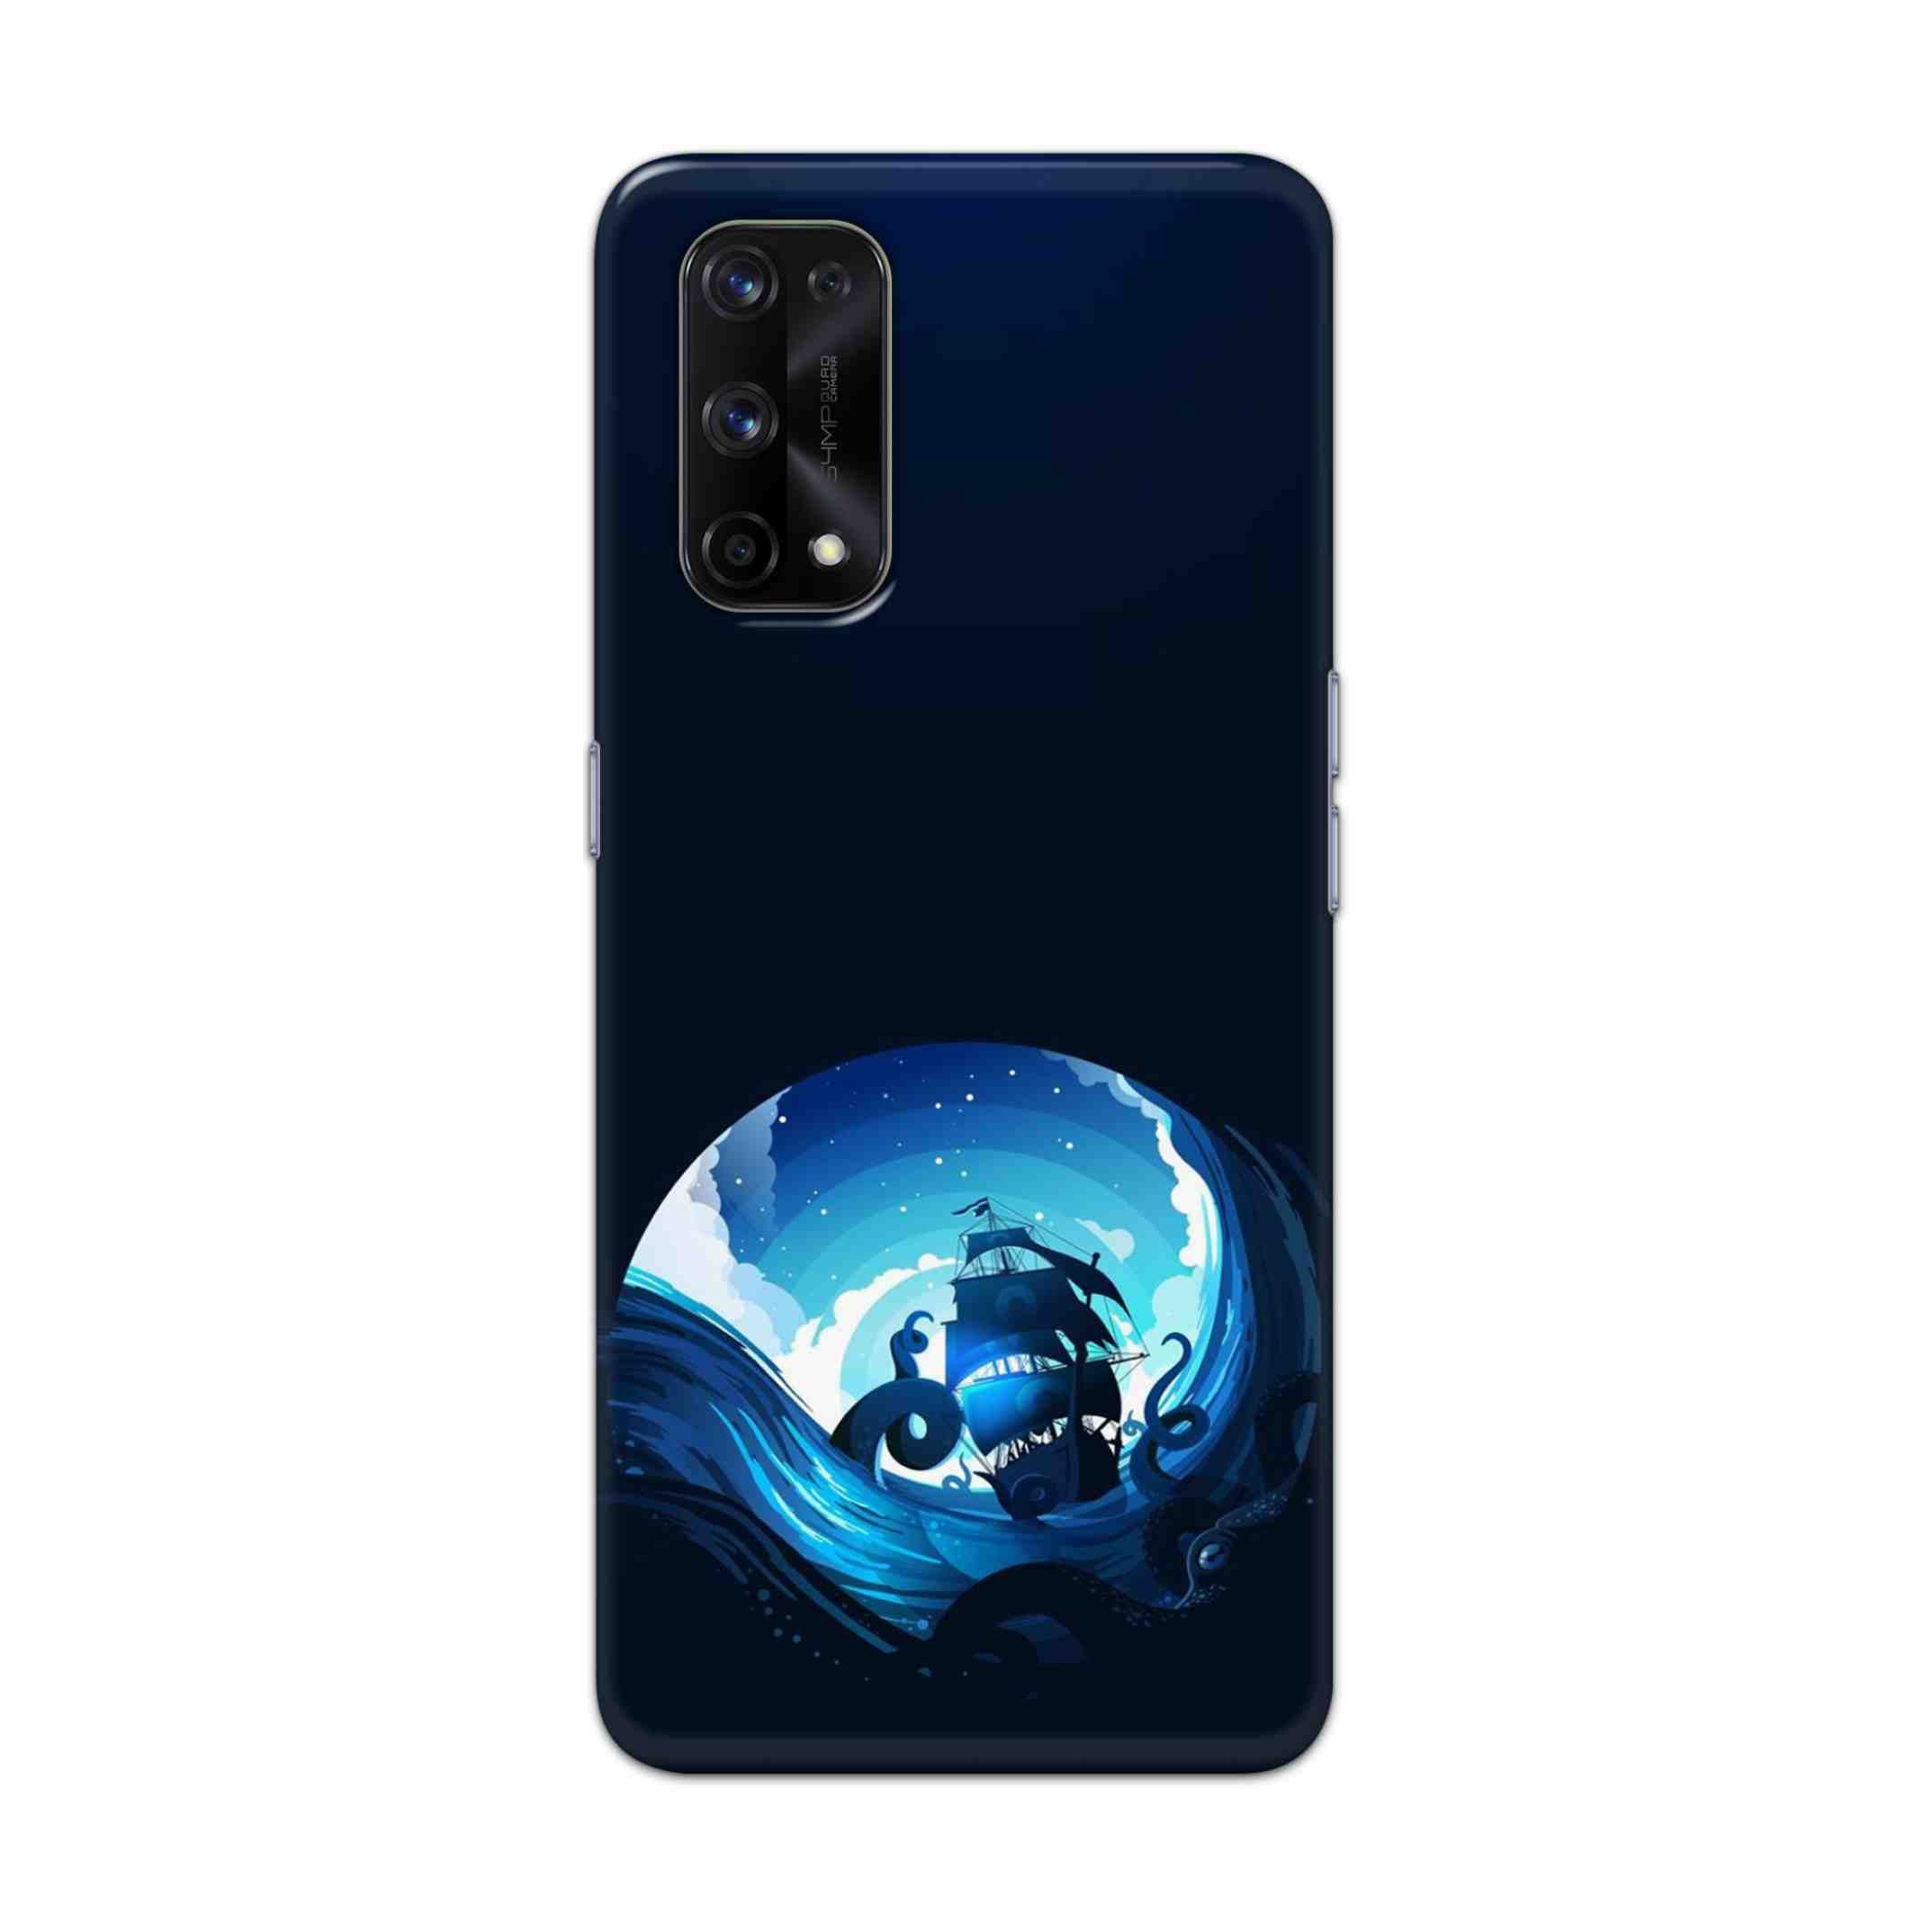 Buy Blue Sea Ship Hard Back Mobile Phone Case Cover For Realme X7 Pro Online